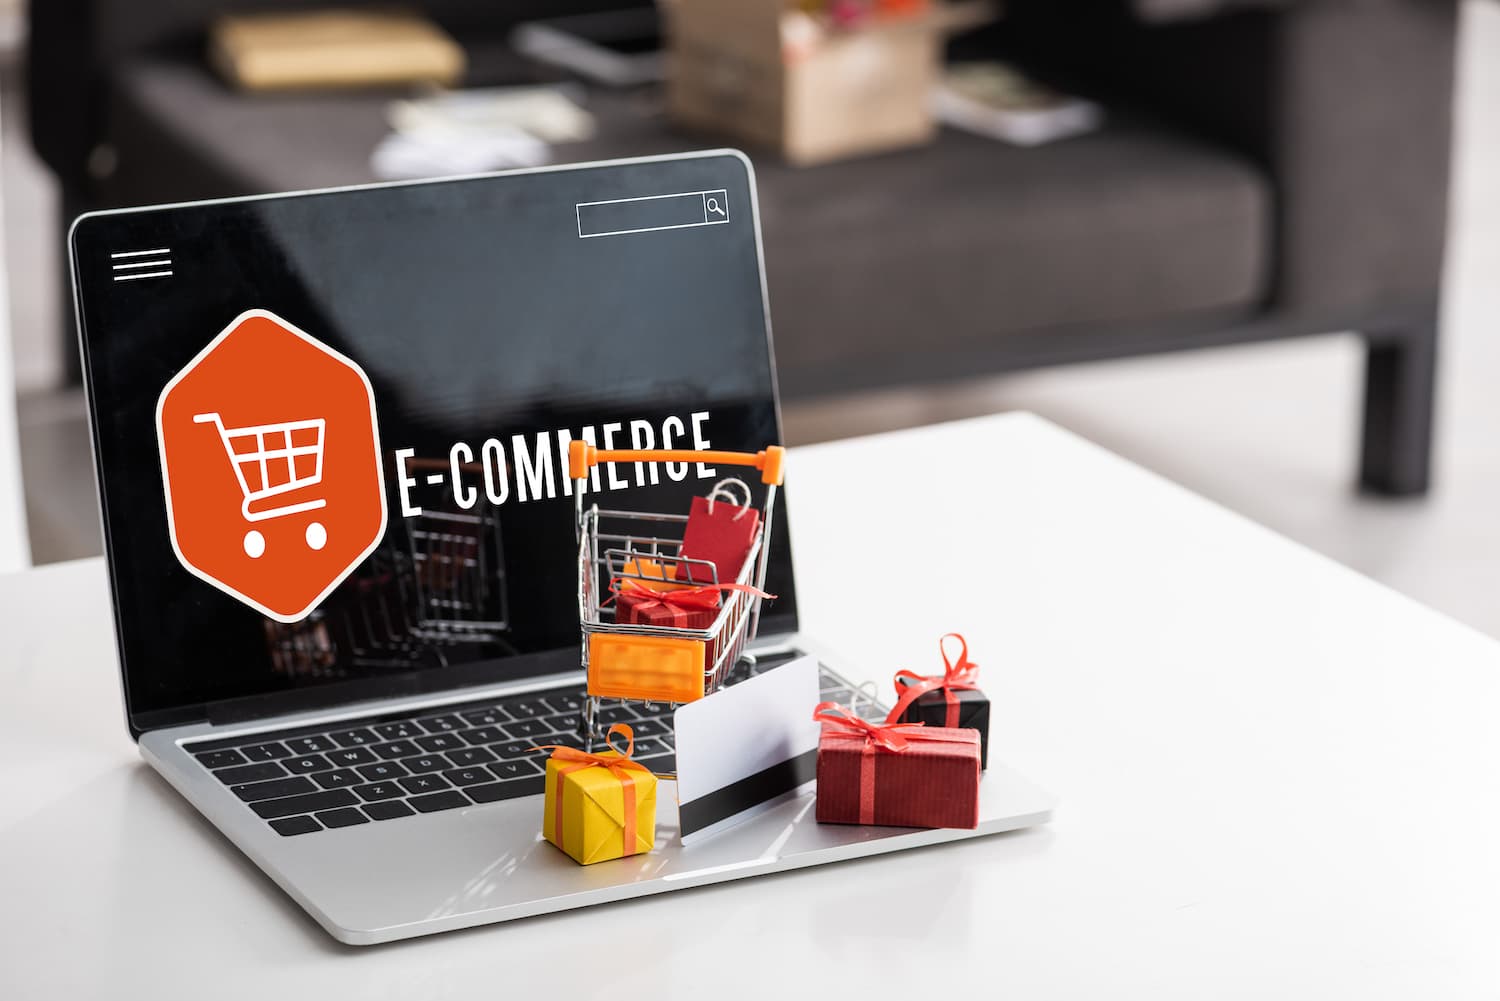 Ecommerce and Business image